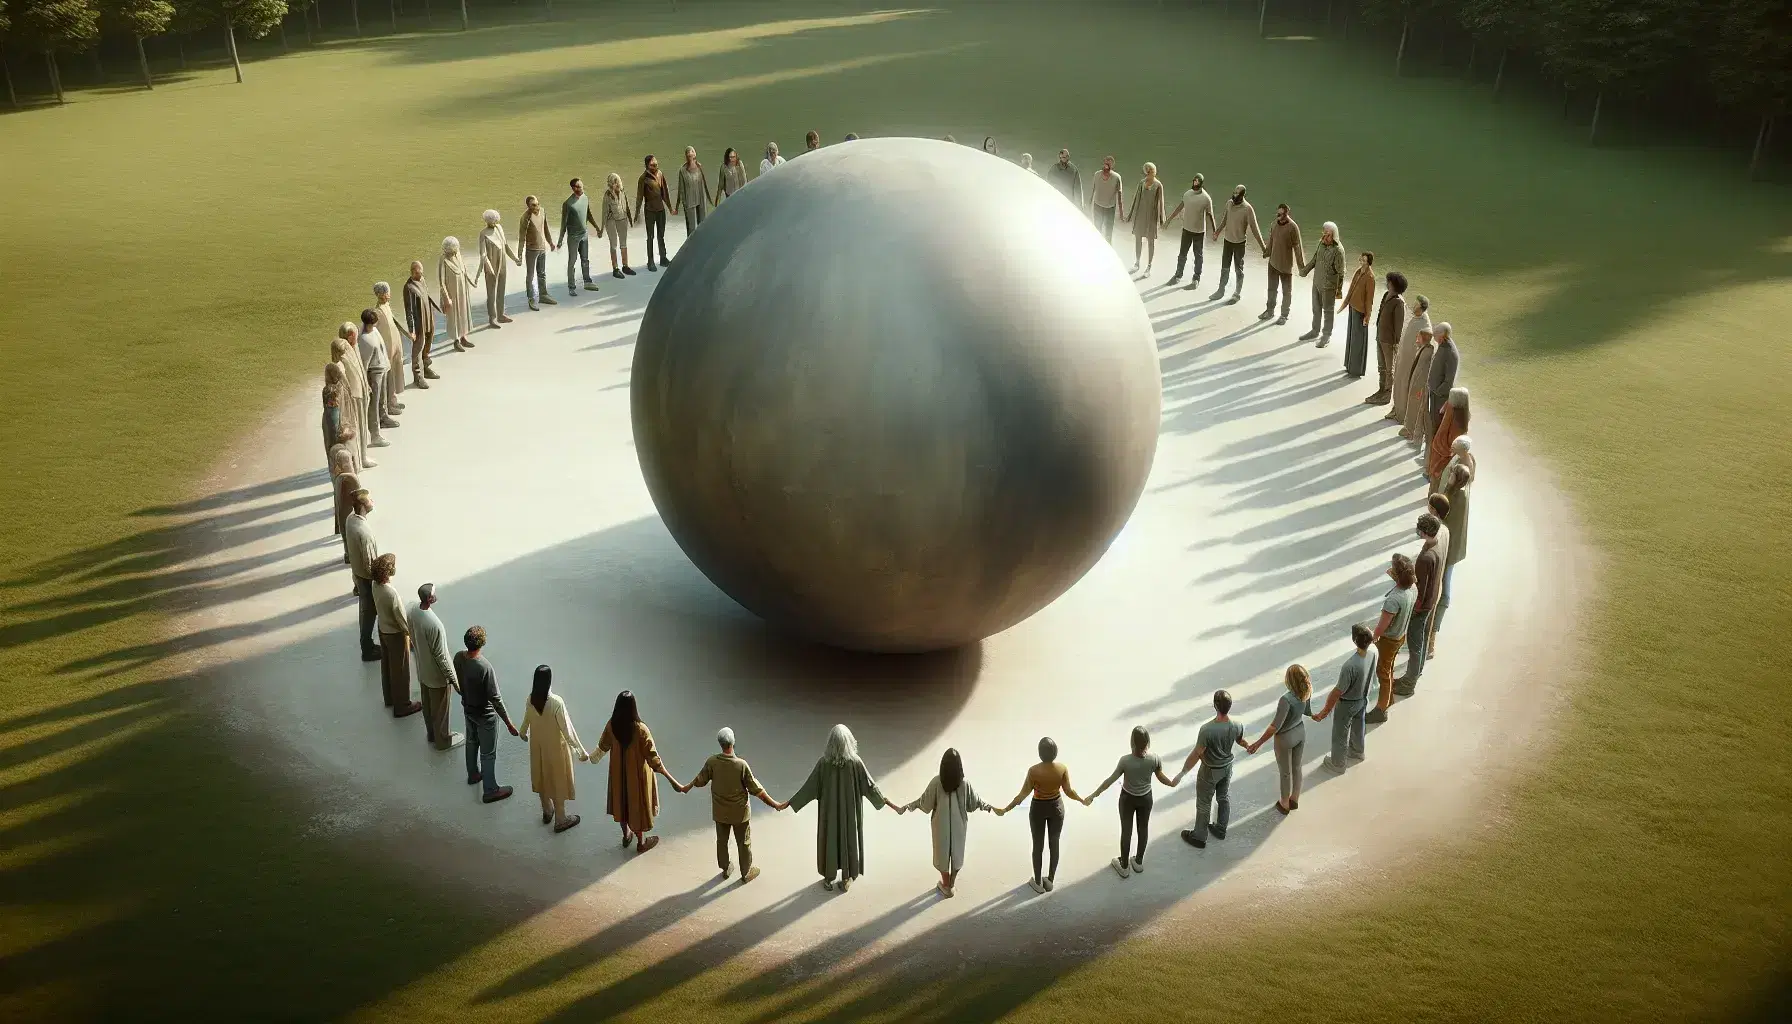 Diverse group of individuals in muted attire encircle and touch a large matte gray sphere in a green park, symbolizing global unity under soft daylight.